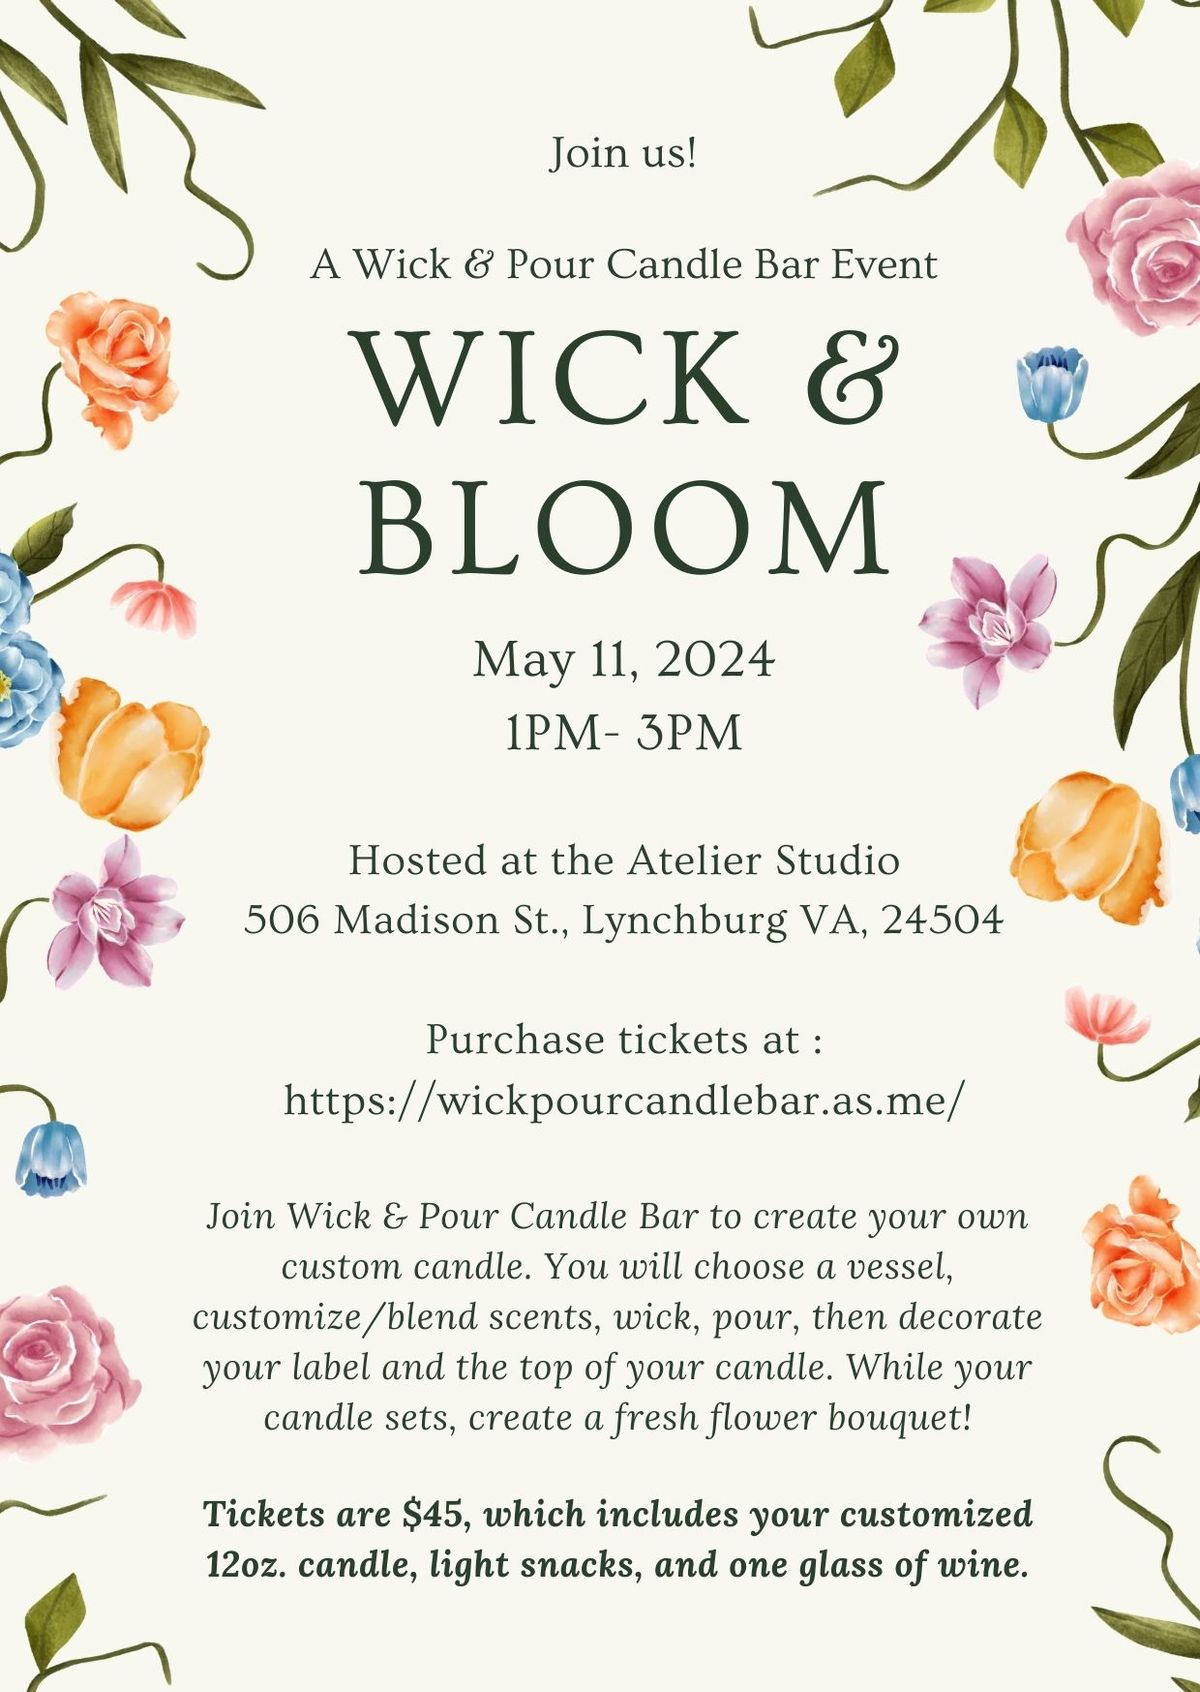 Wick & Bloom Event (Presented by Wick & Pour Candle Bar) 